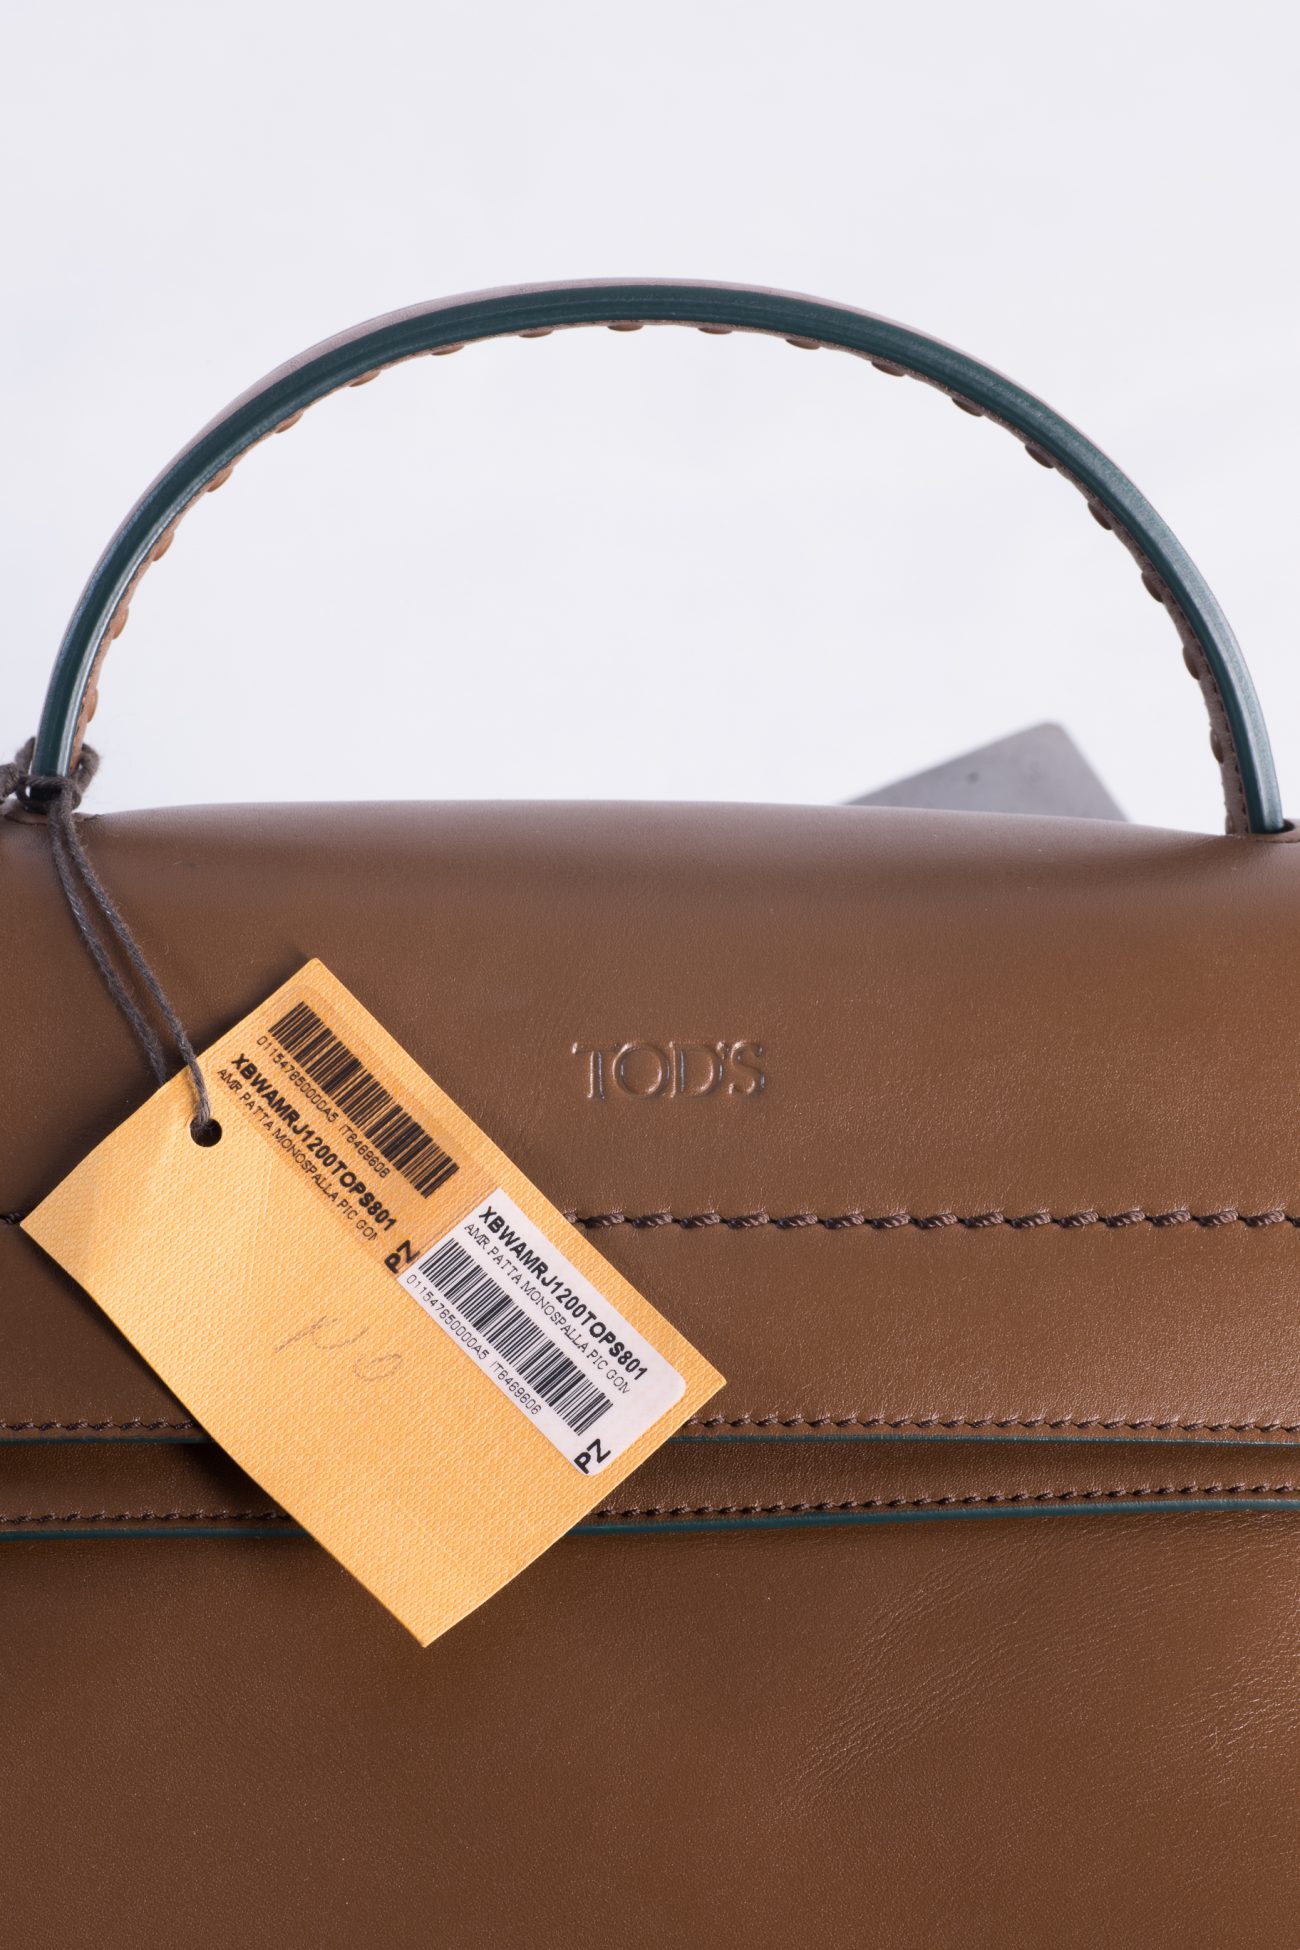 Tods Handle Bag 'WAVE' in Brown and Turquoise